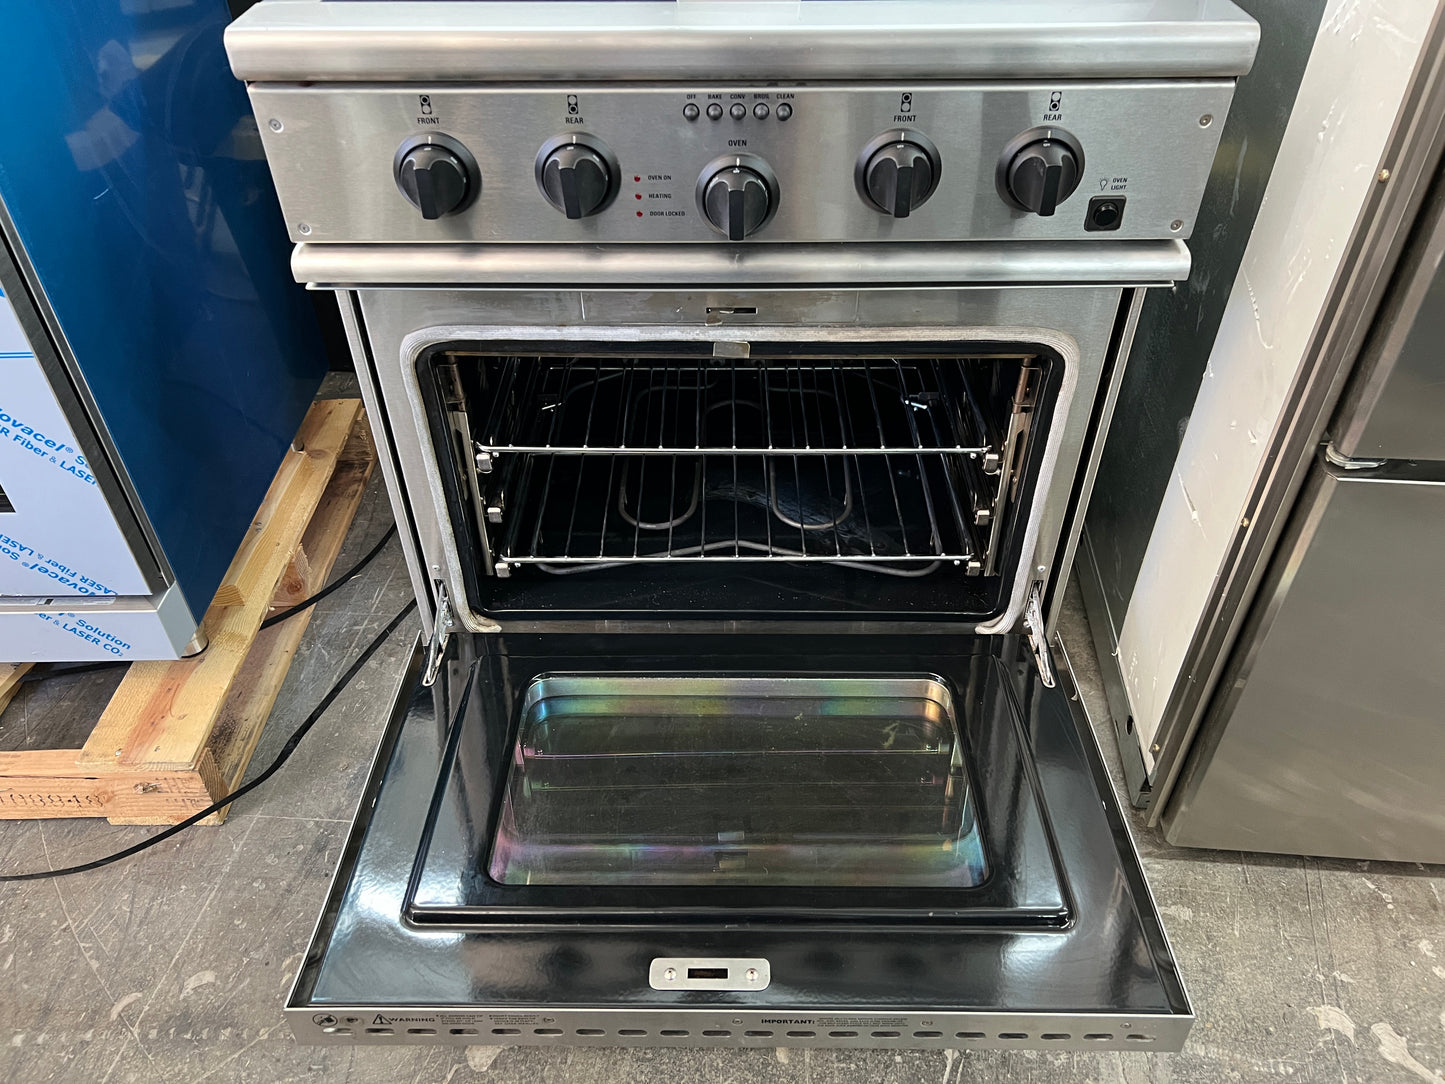 30 Inch GE Monogram Gas Range Dual Fuel, Convection Oven, 4 Open Burners, ZDP30N4YSS Convection Oven, Stainless Steel, 369159